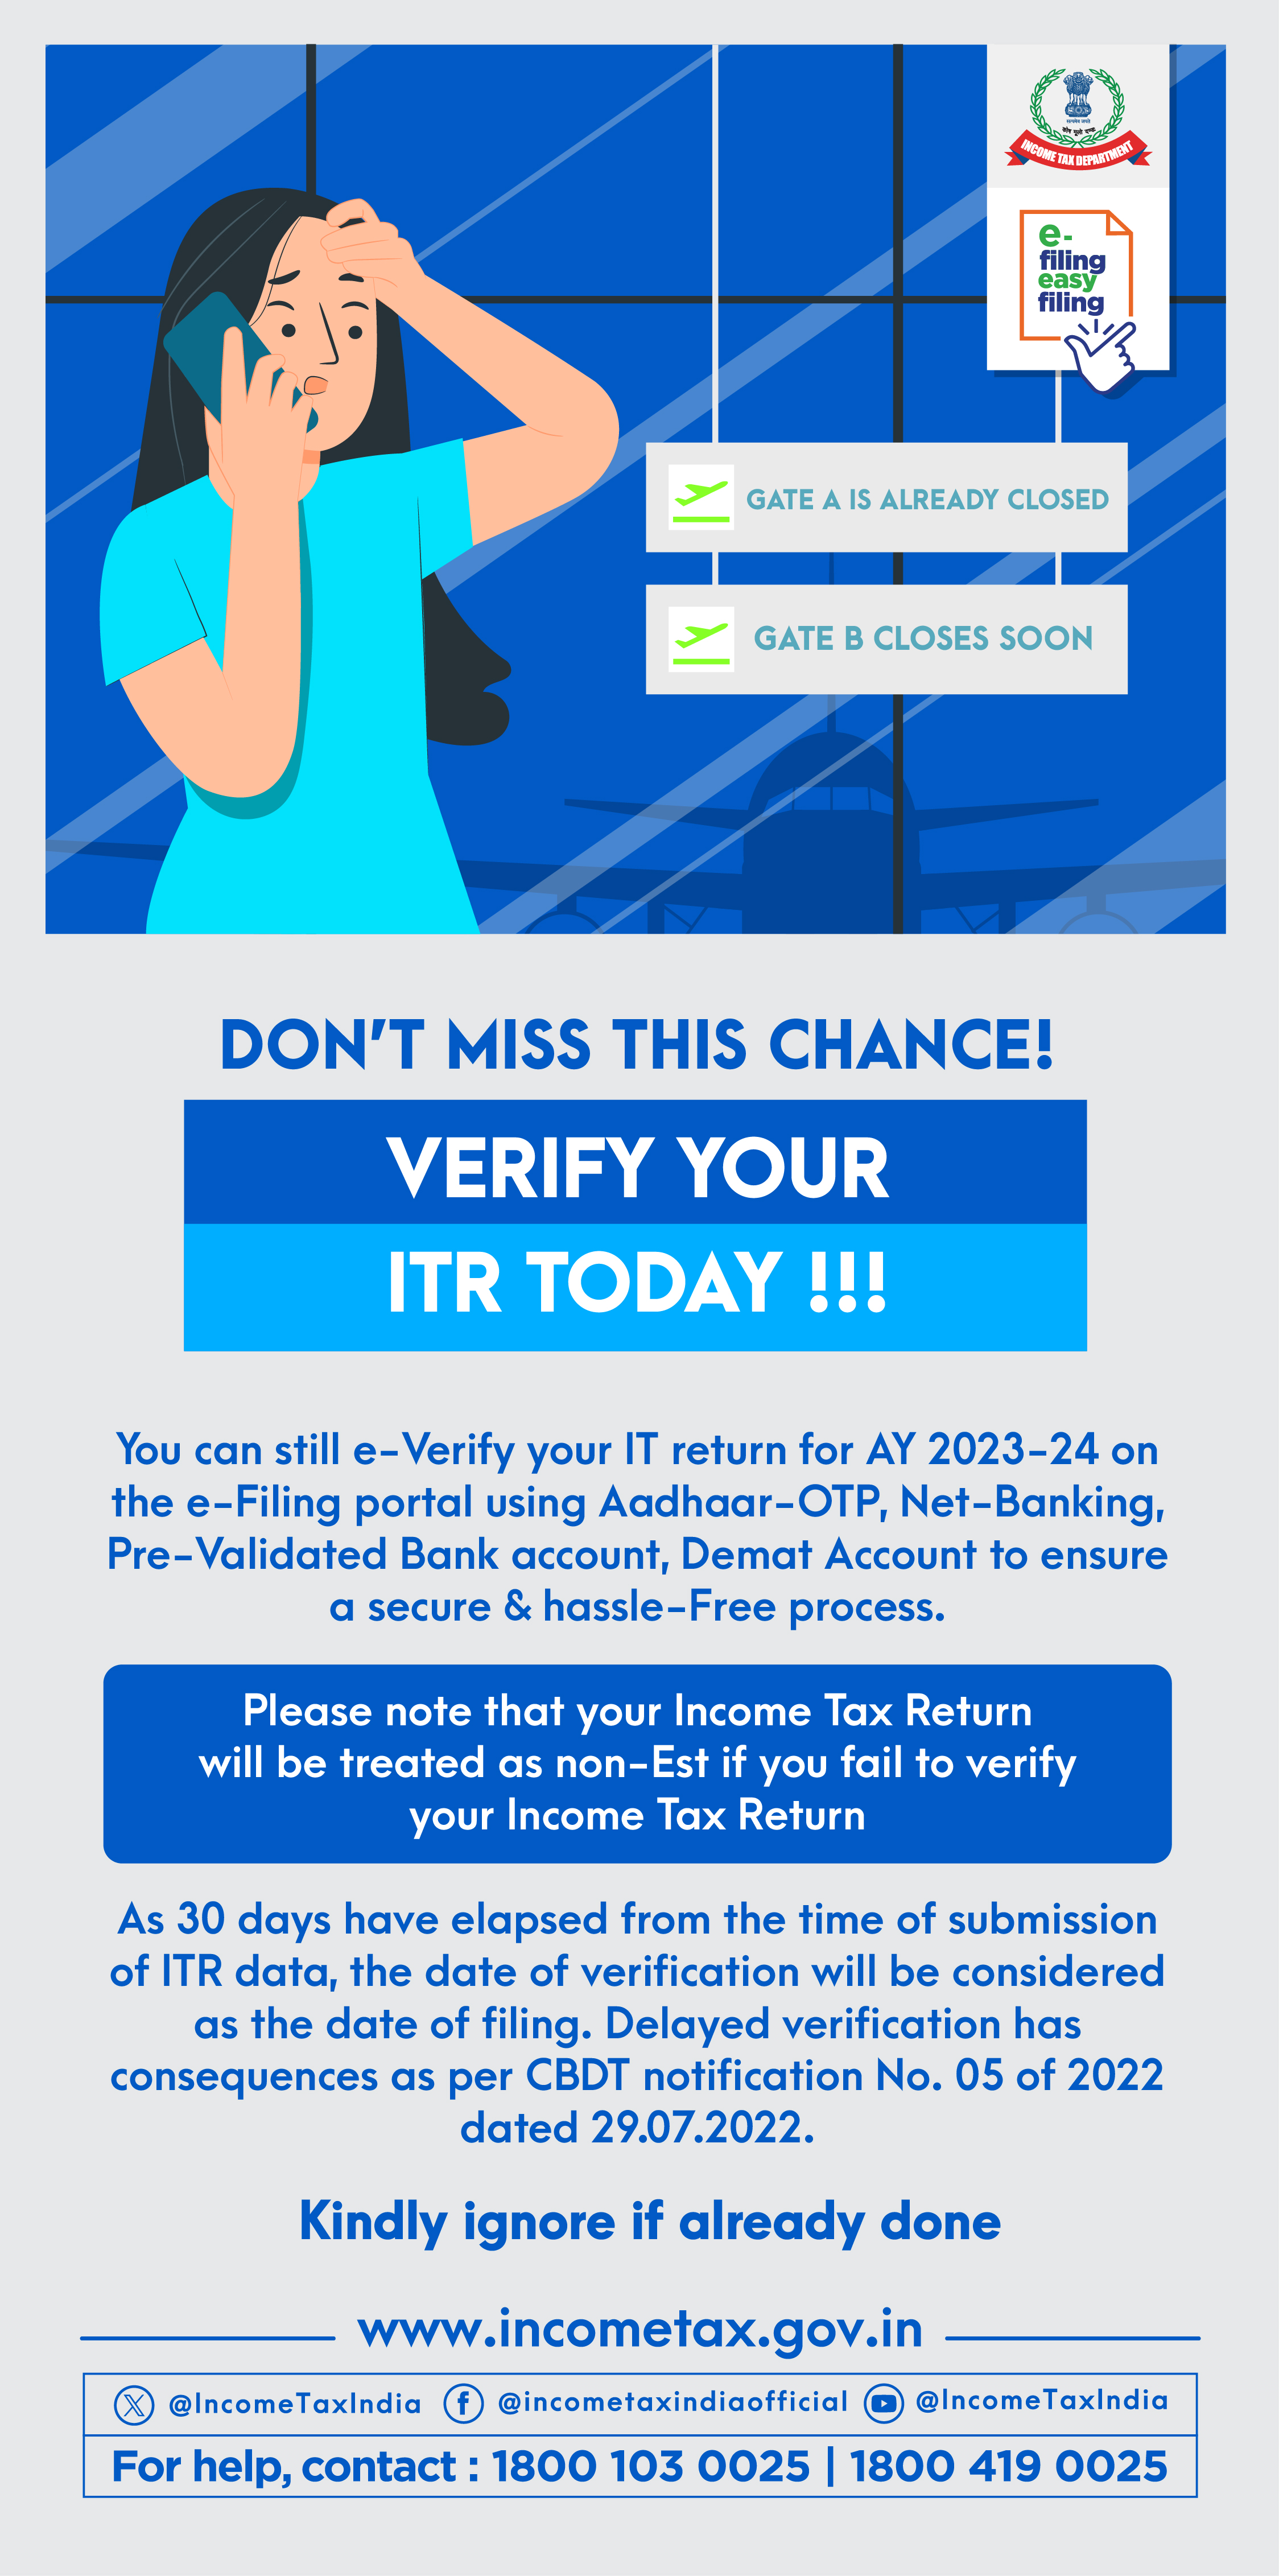  Verify your ITR for AY 2023-24 to avoid last minute rush, Ignore if already verified